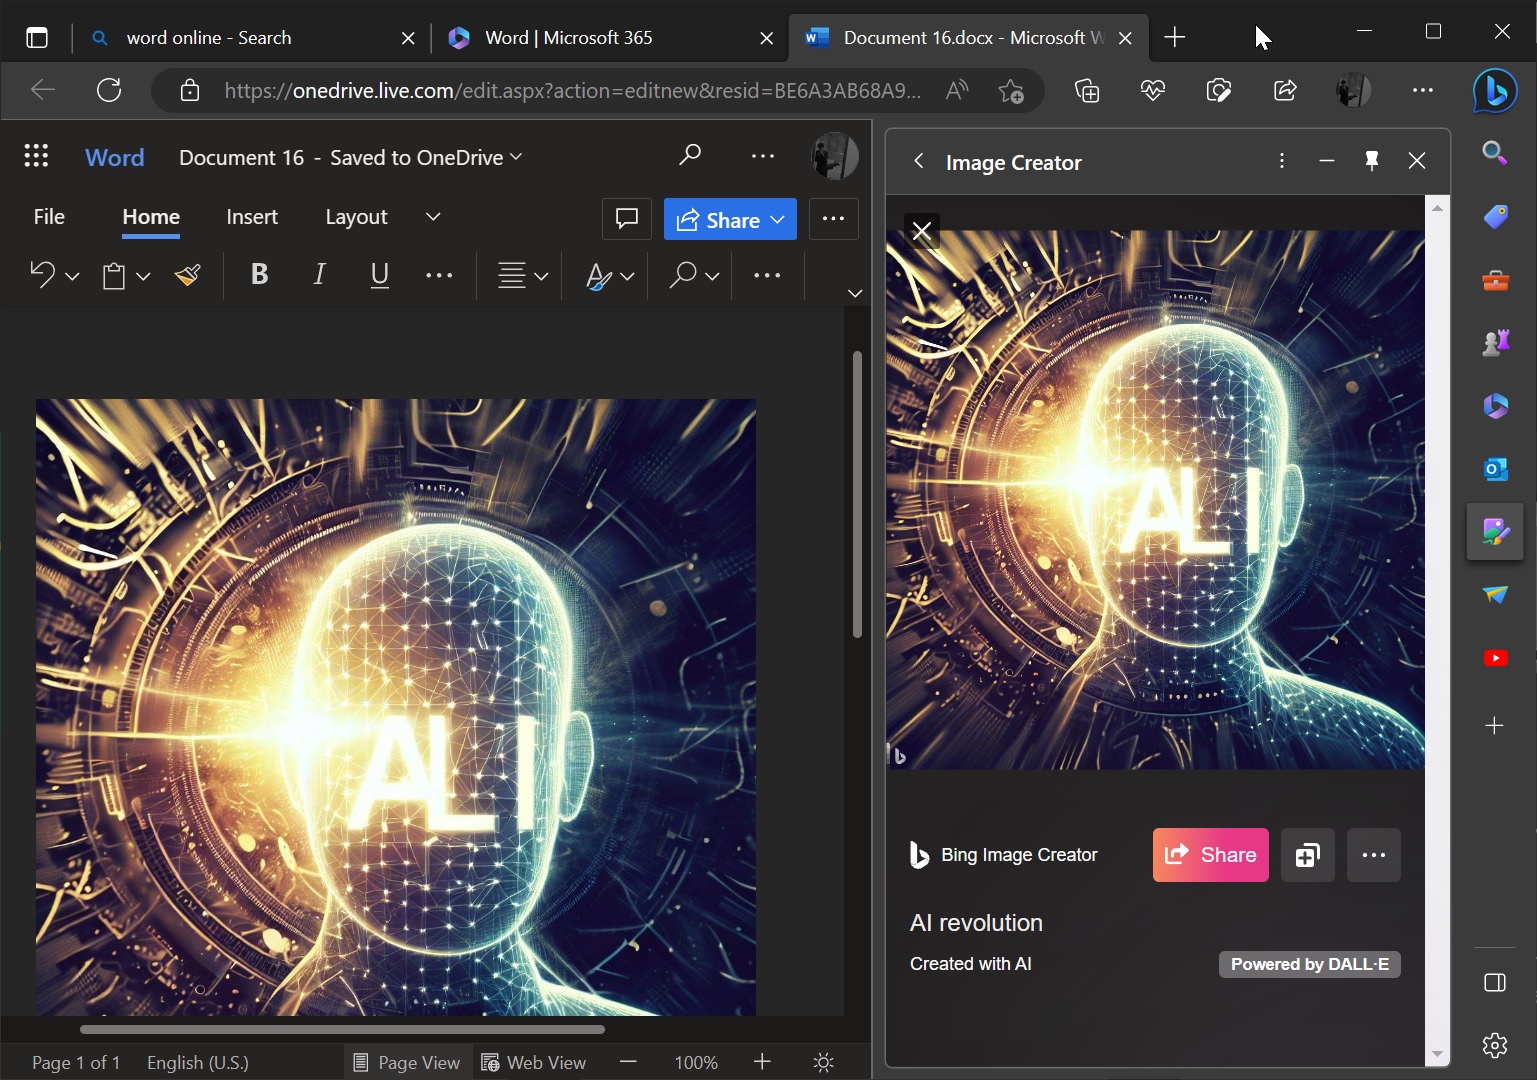 Microsoft Edge can now generate images with AI